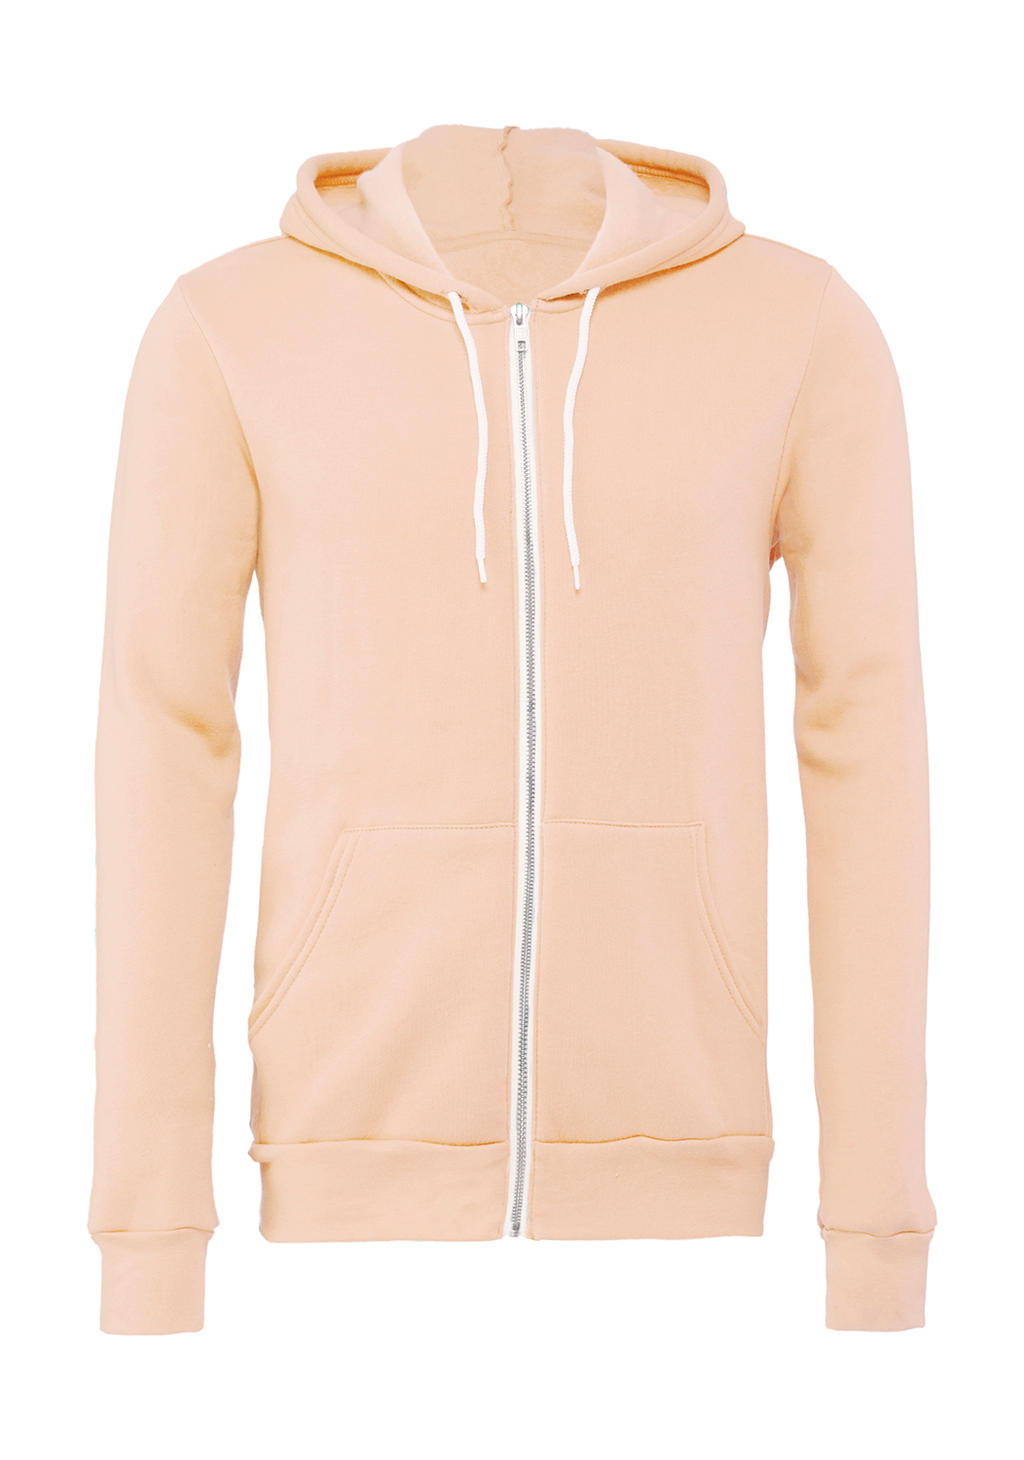  Unisex Poly-Cotton Full Zip Hoodie in Farbe Peach